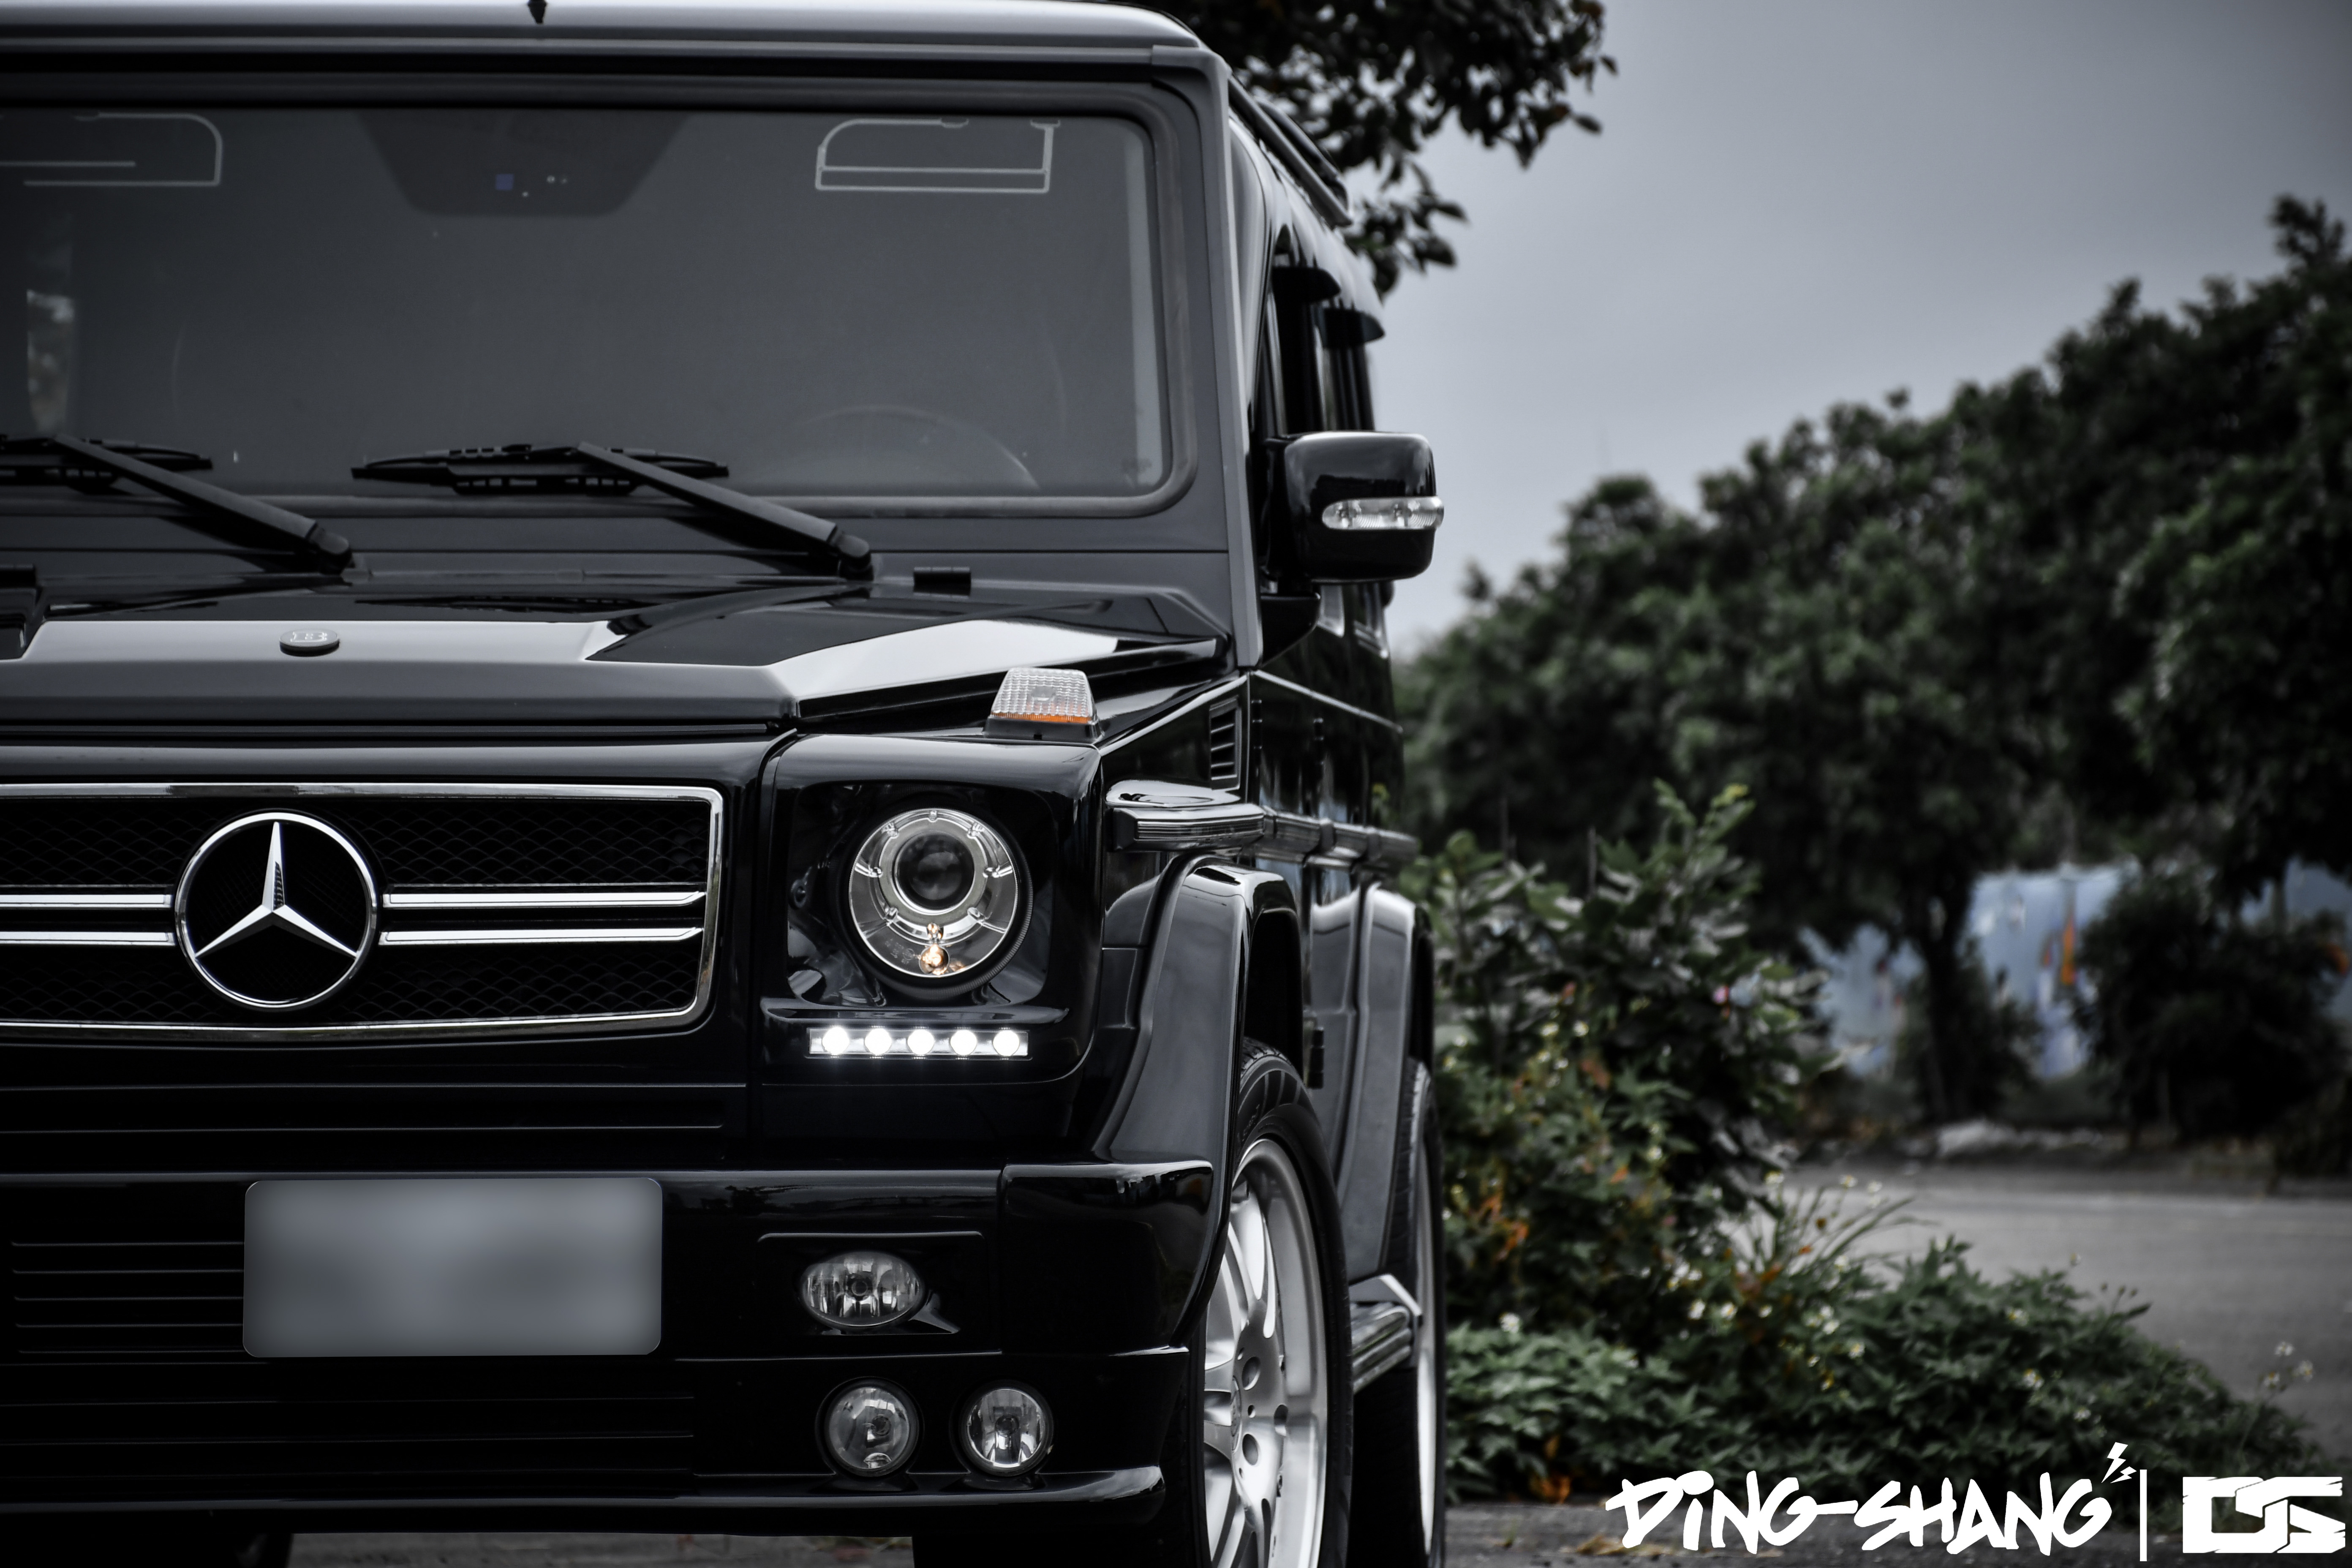 suv, brabus, cars, mercedes benz g500, front view, black, luxurious